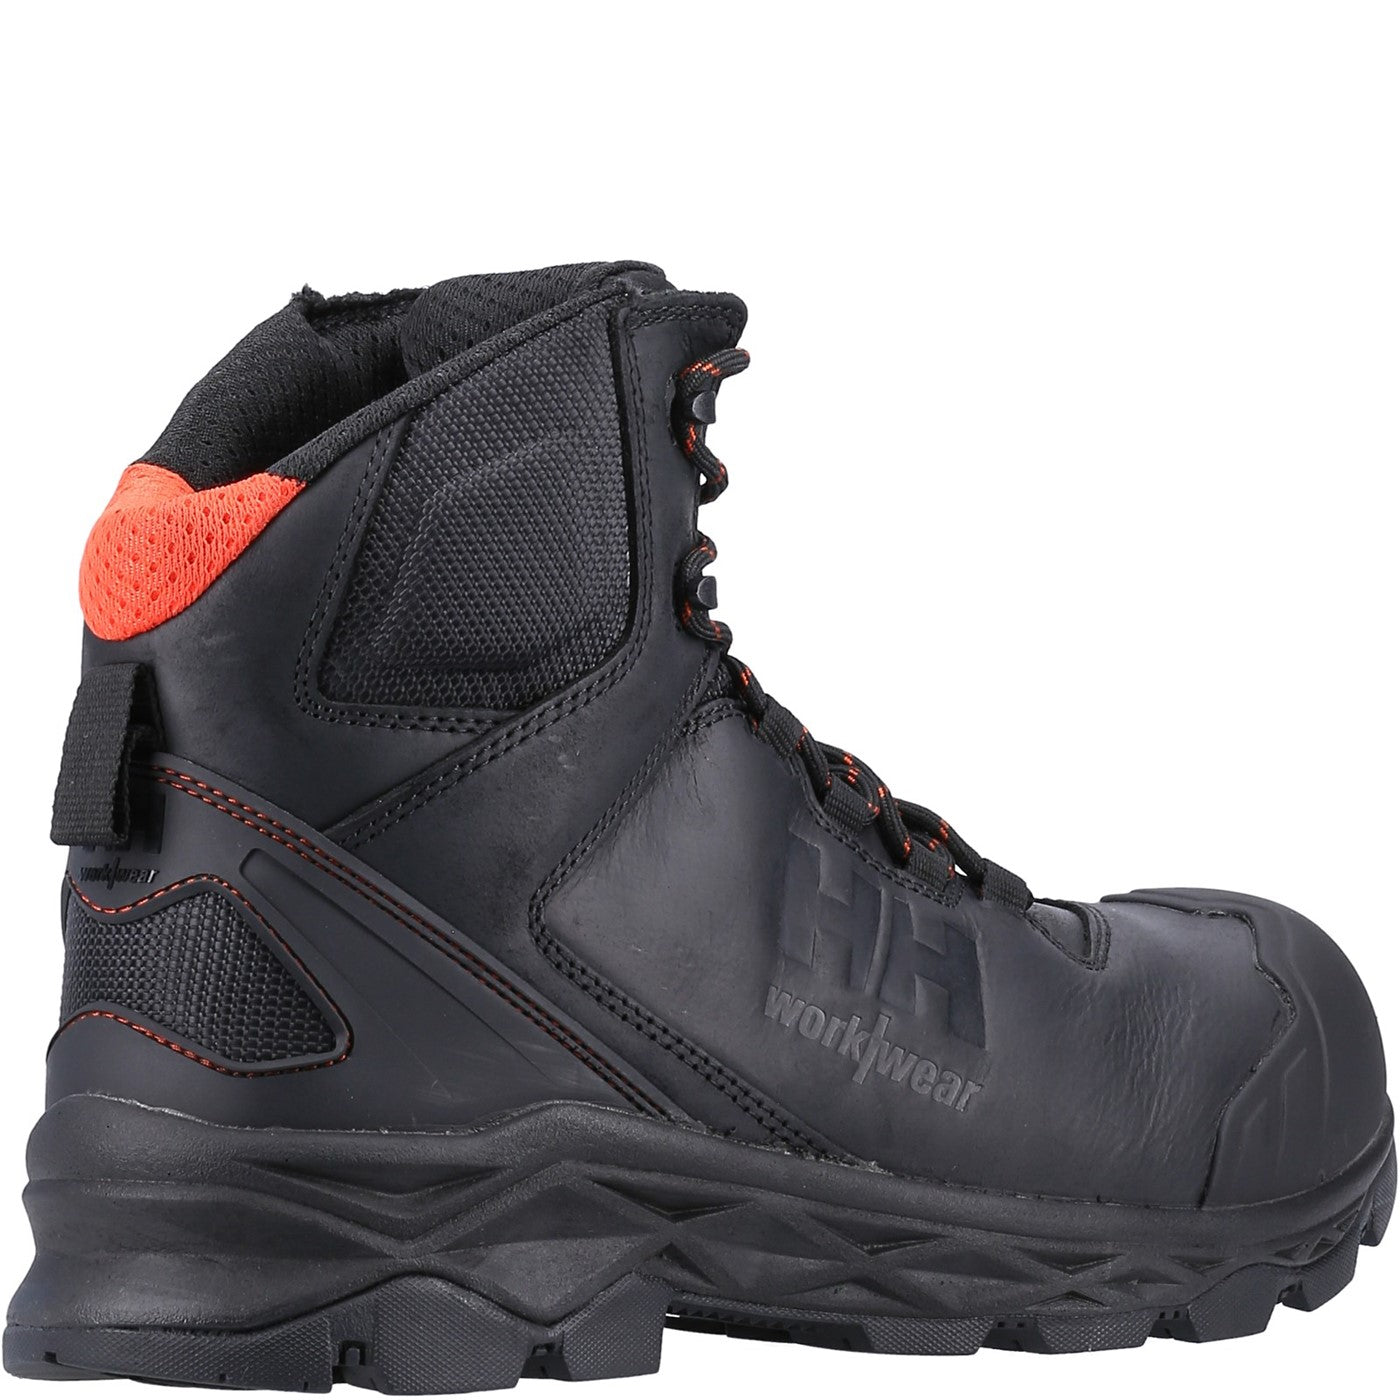 Helly Hansen Oxford Mid S3 Safety Boot S3 Black